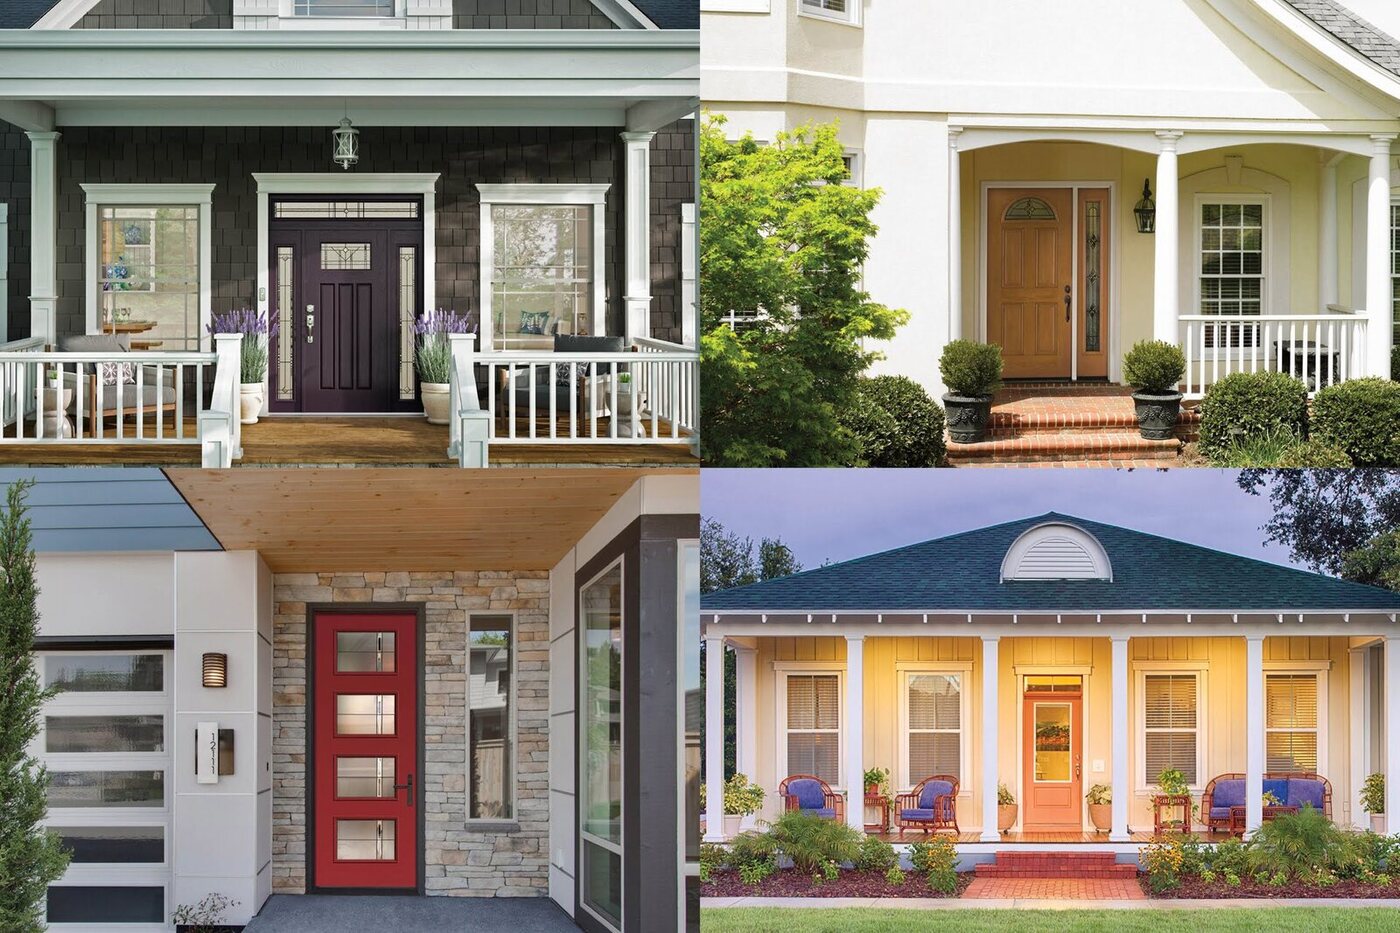 Do Front Door Colors Mean Anything? 7 Most Popular Colors Analyzed